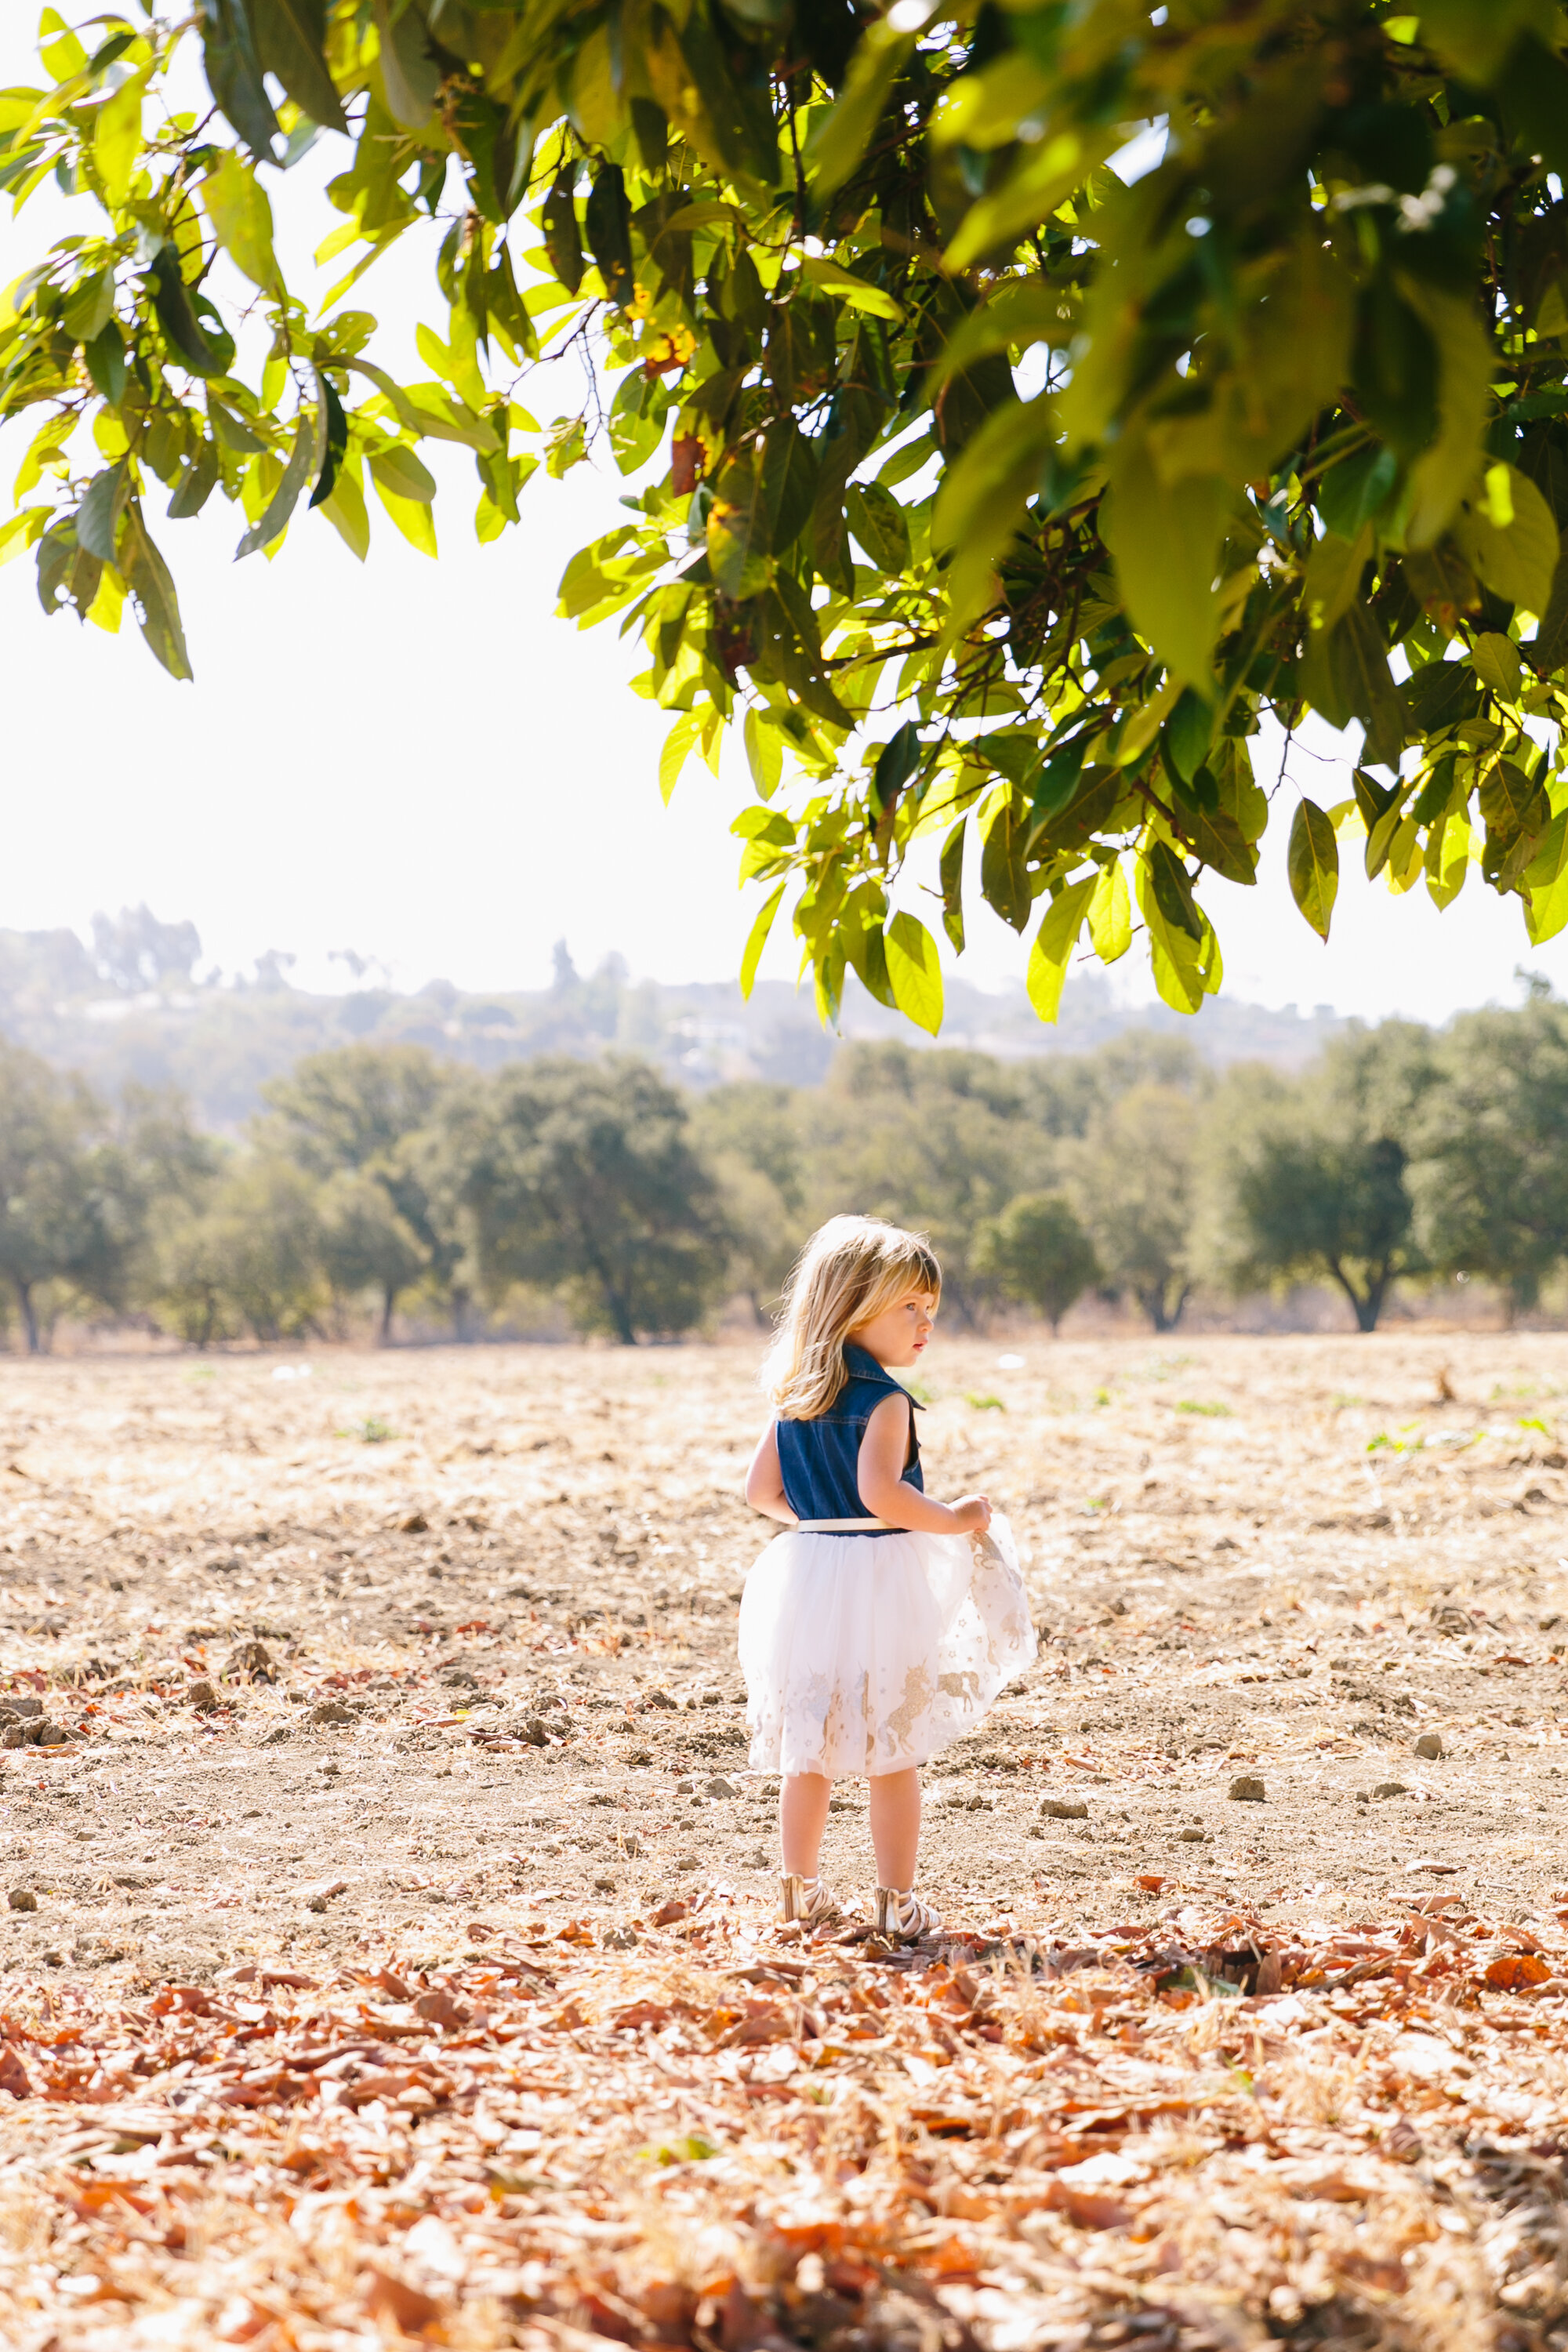 Los_Angeles_Family_Photography_Orange_County_Children_Babies_Field_Farm_Outdoors_Morning_Session_California_Girls_Boys_Kids_Photography-1124.jpg